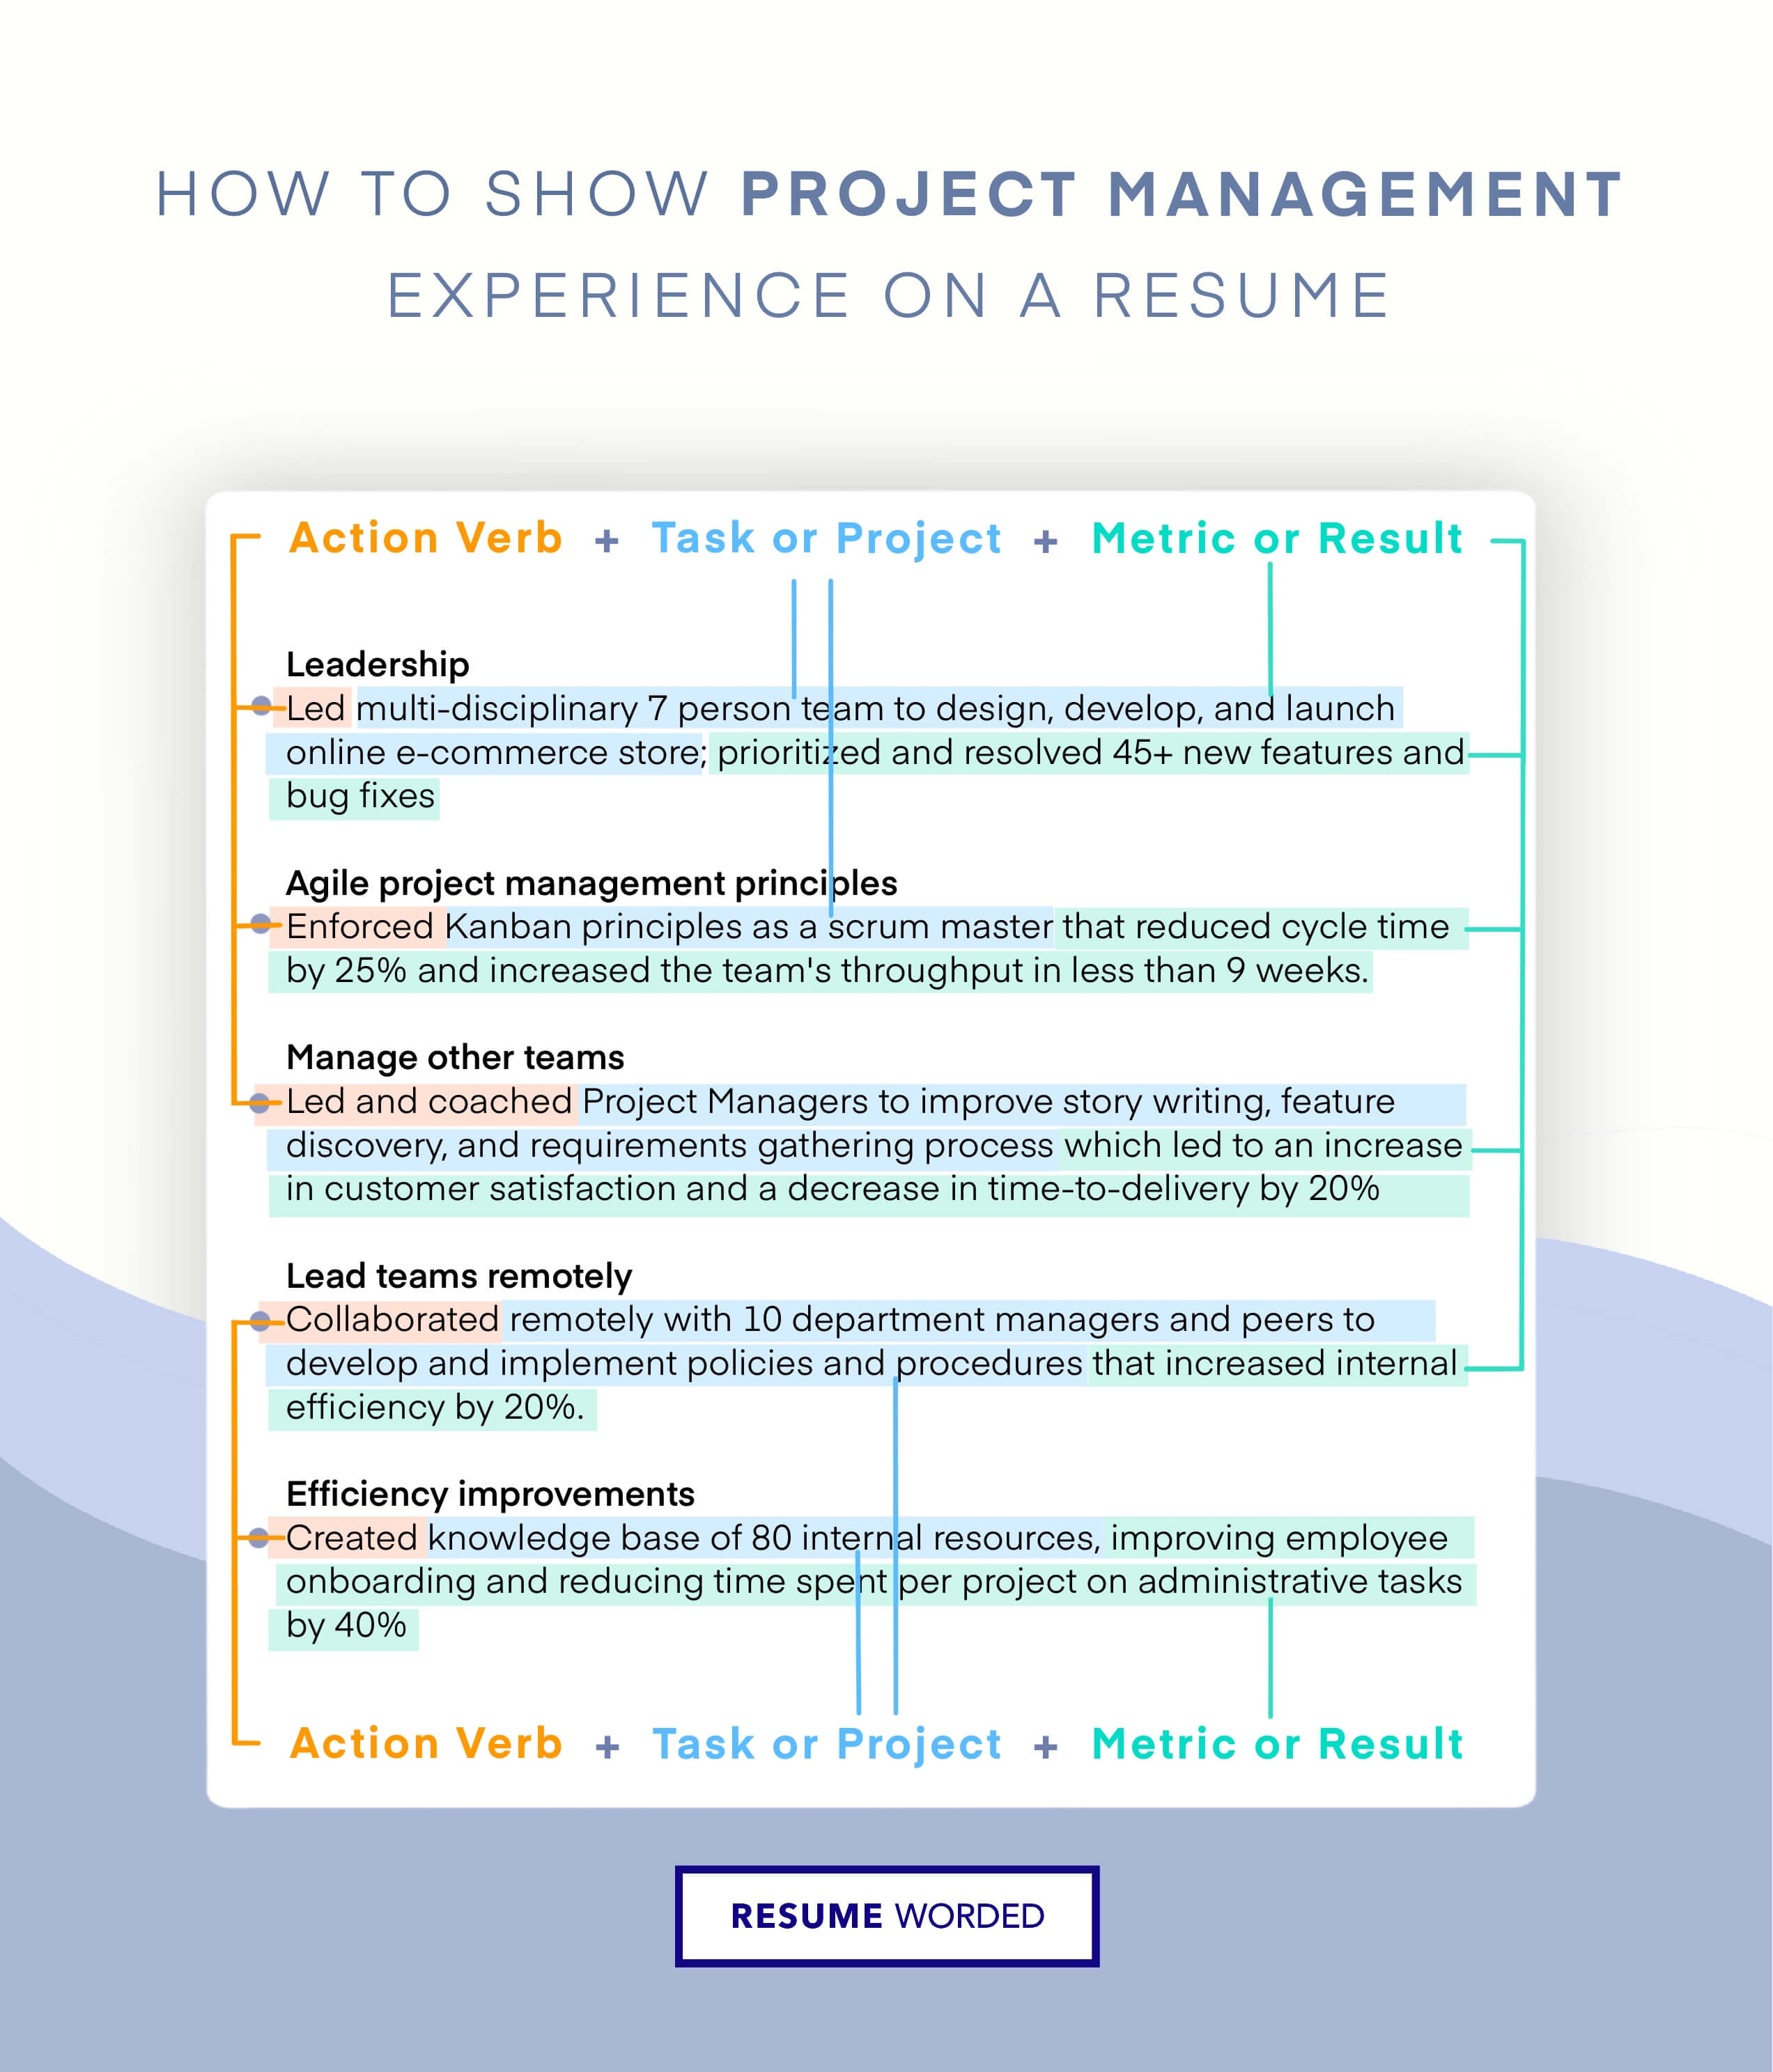 Showcase direct project involvement - Film Production Manager CV